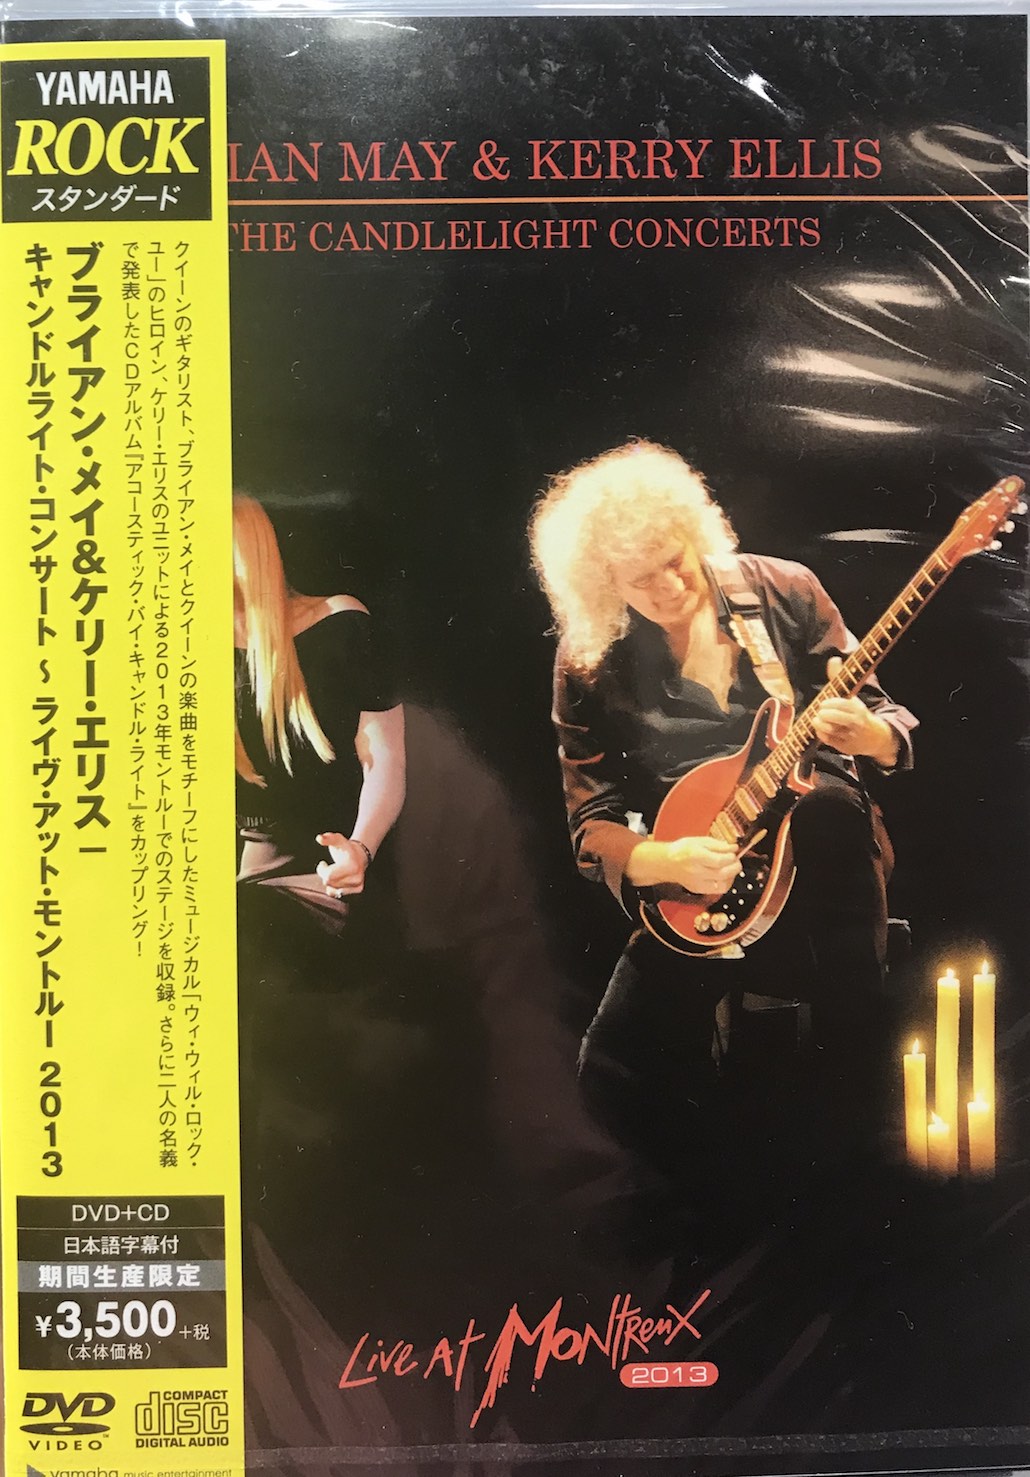 Brian May & Kerry Ellis - The Candlelight Concerts - Live At Montreux 2013